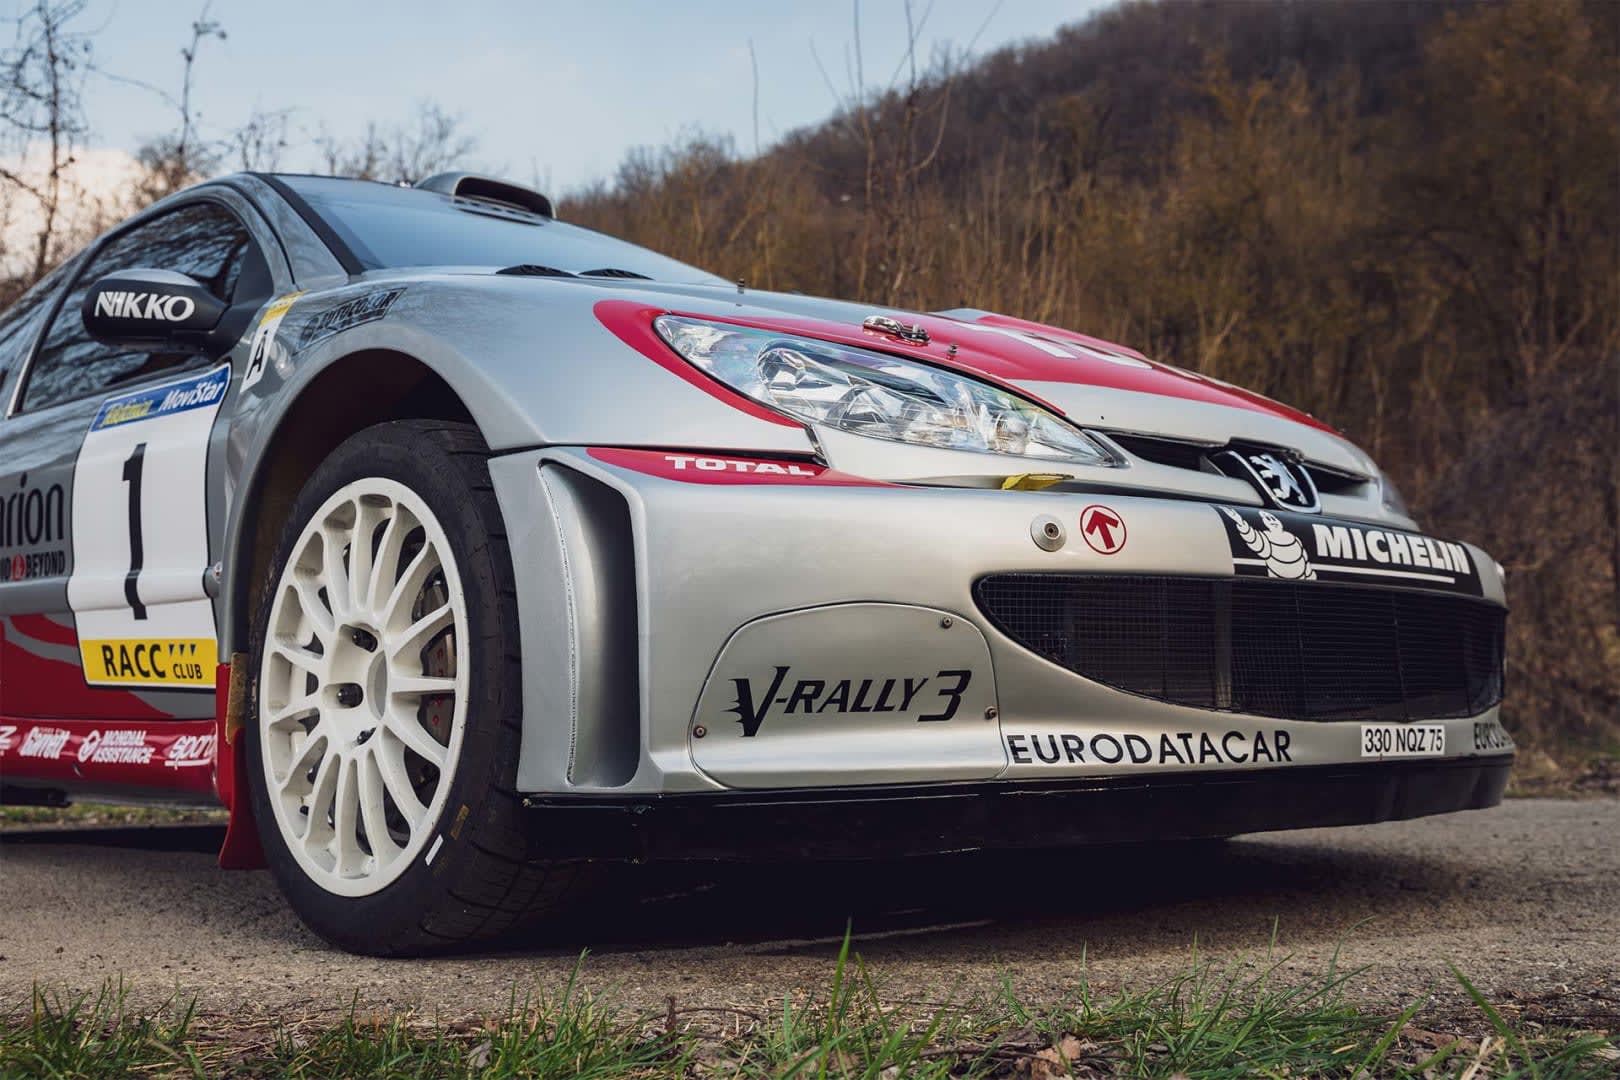 This Peugeot 206 WRC Is the Coolest Car on Sale Right Now